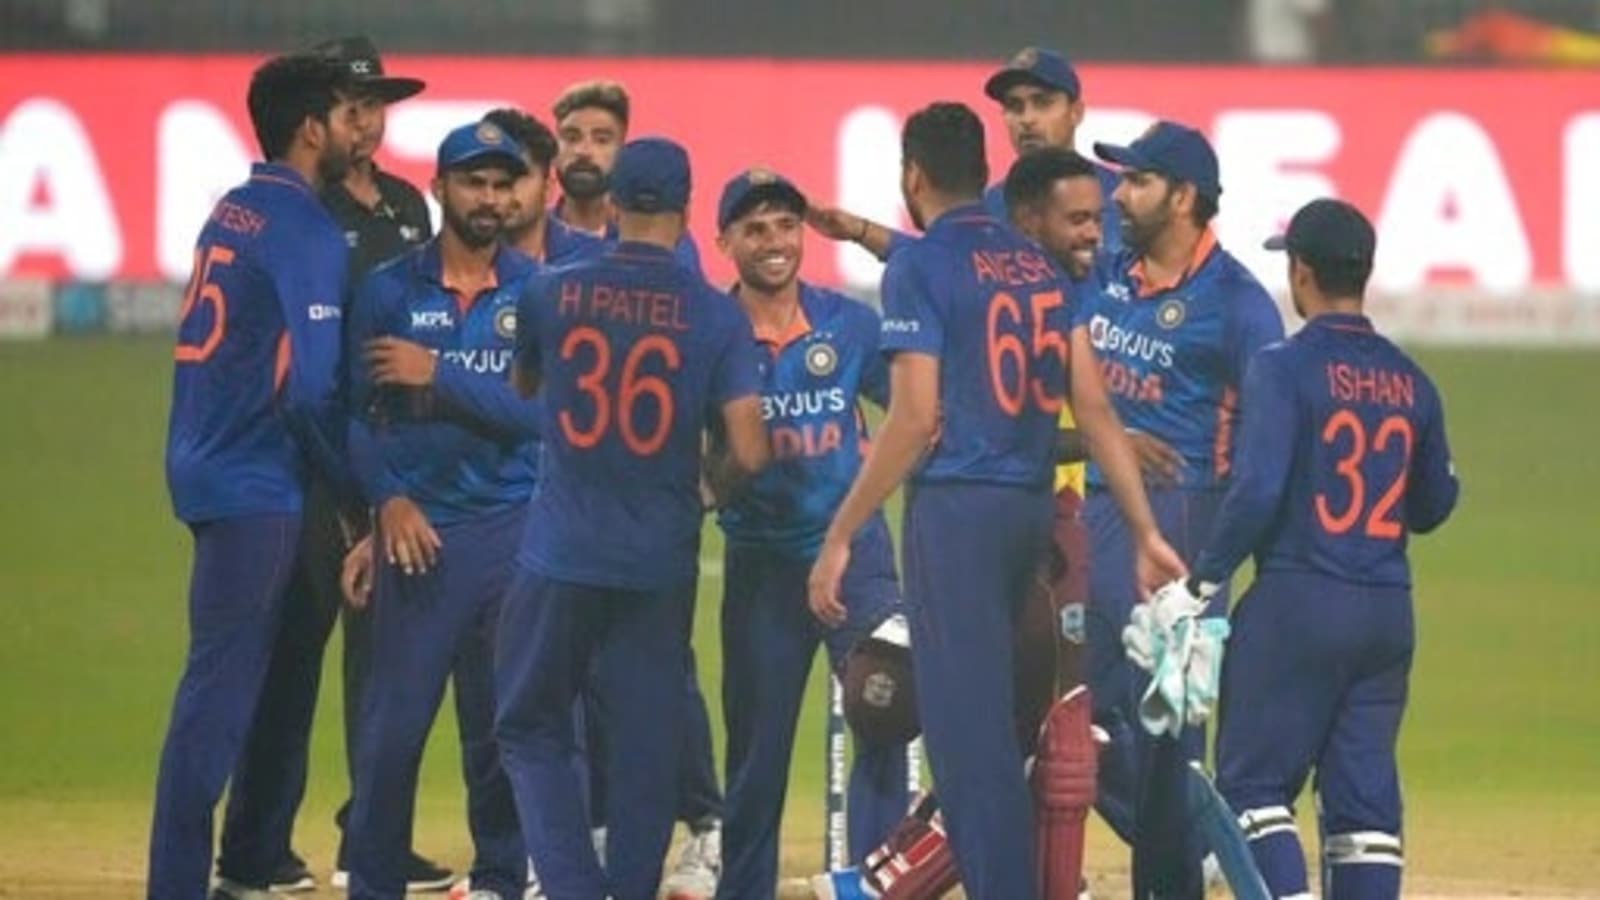 IND vs WI 3rd T20 Highlights Suryakumar, Harshal help IND beat WI by 17 runs to complete 3-0 clean sweep Hindustan Times